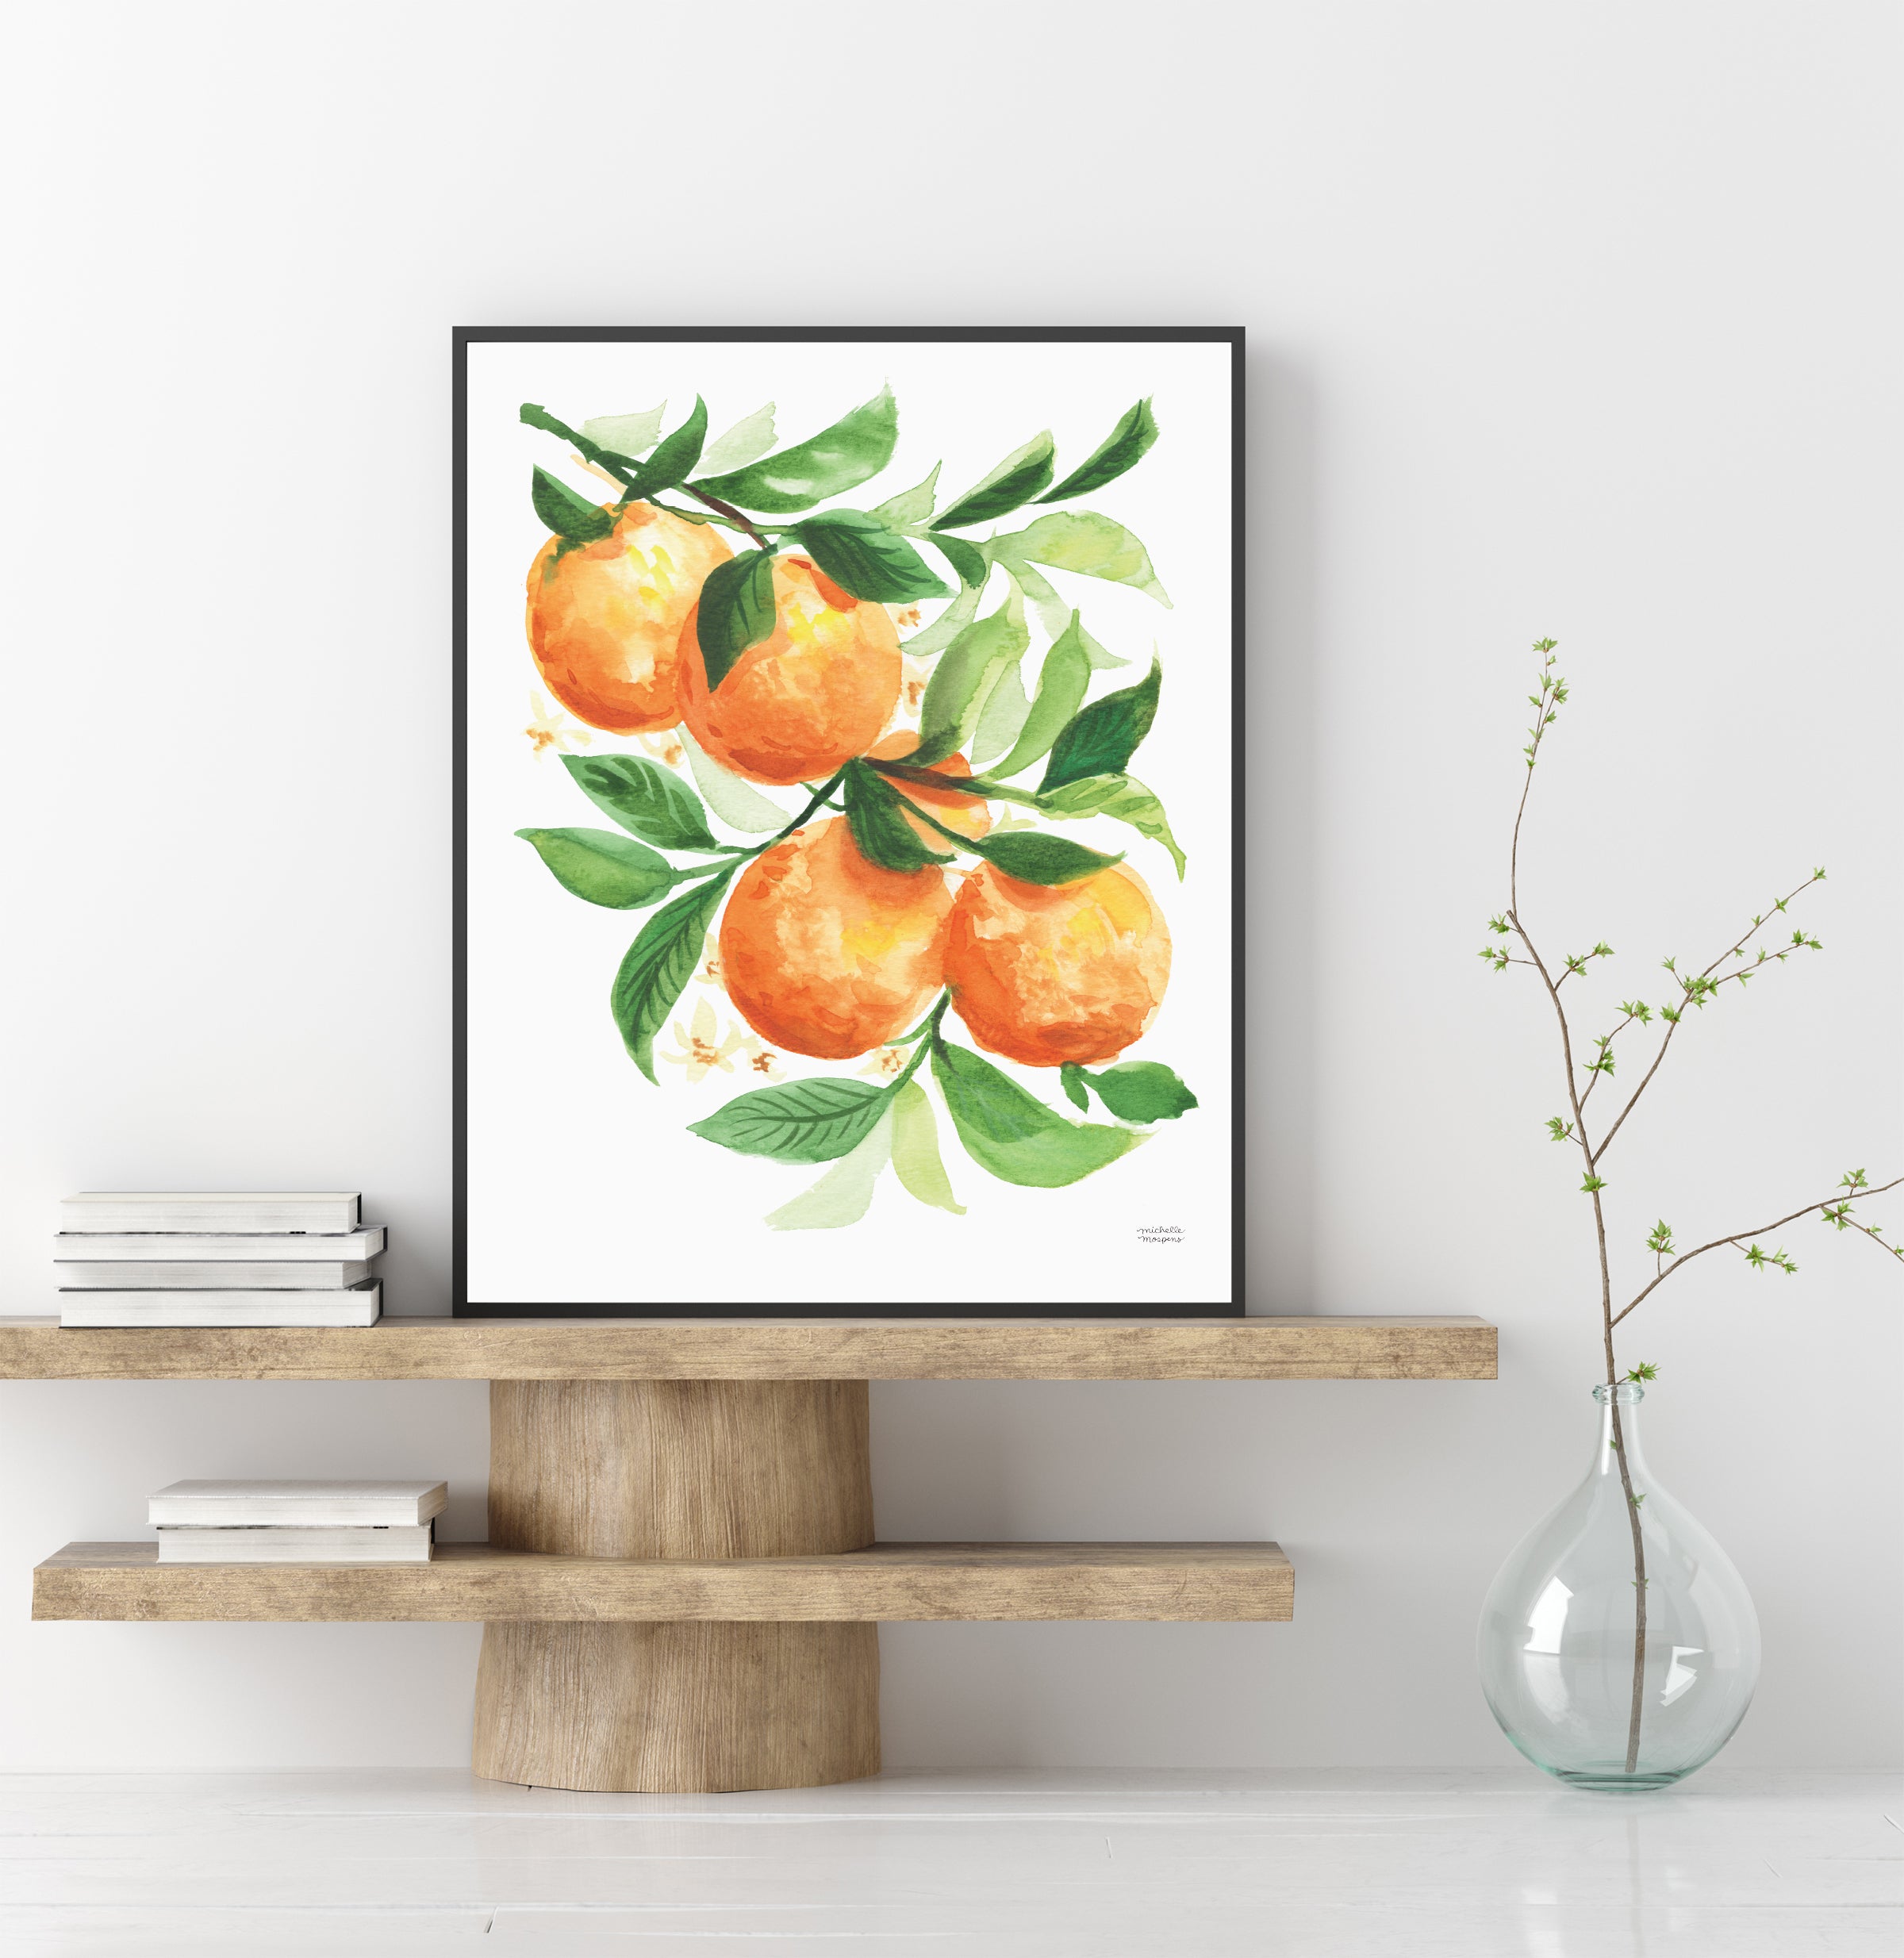 Watercolor Oranges fruit kitchen wall art print. Watercolor painting by artist Michelle Mospens.